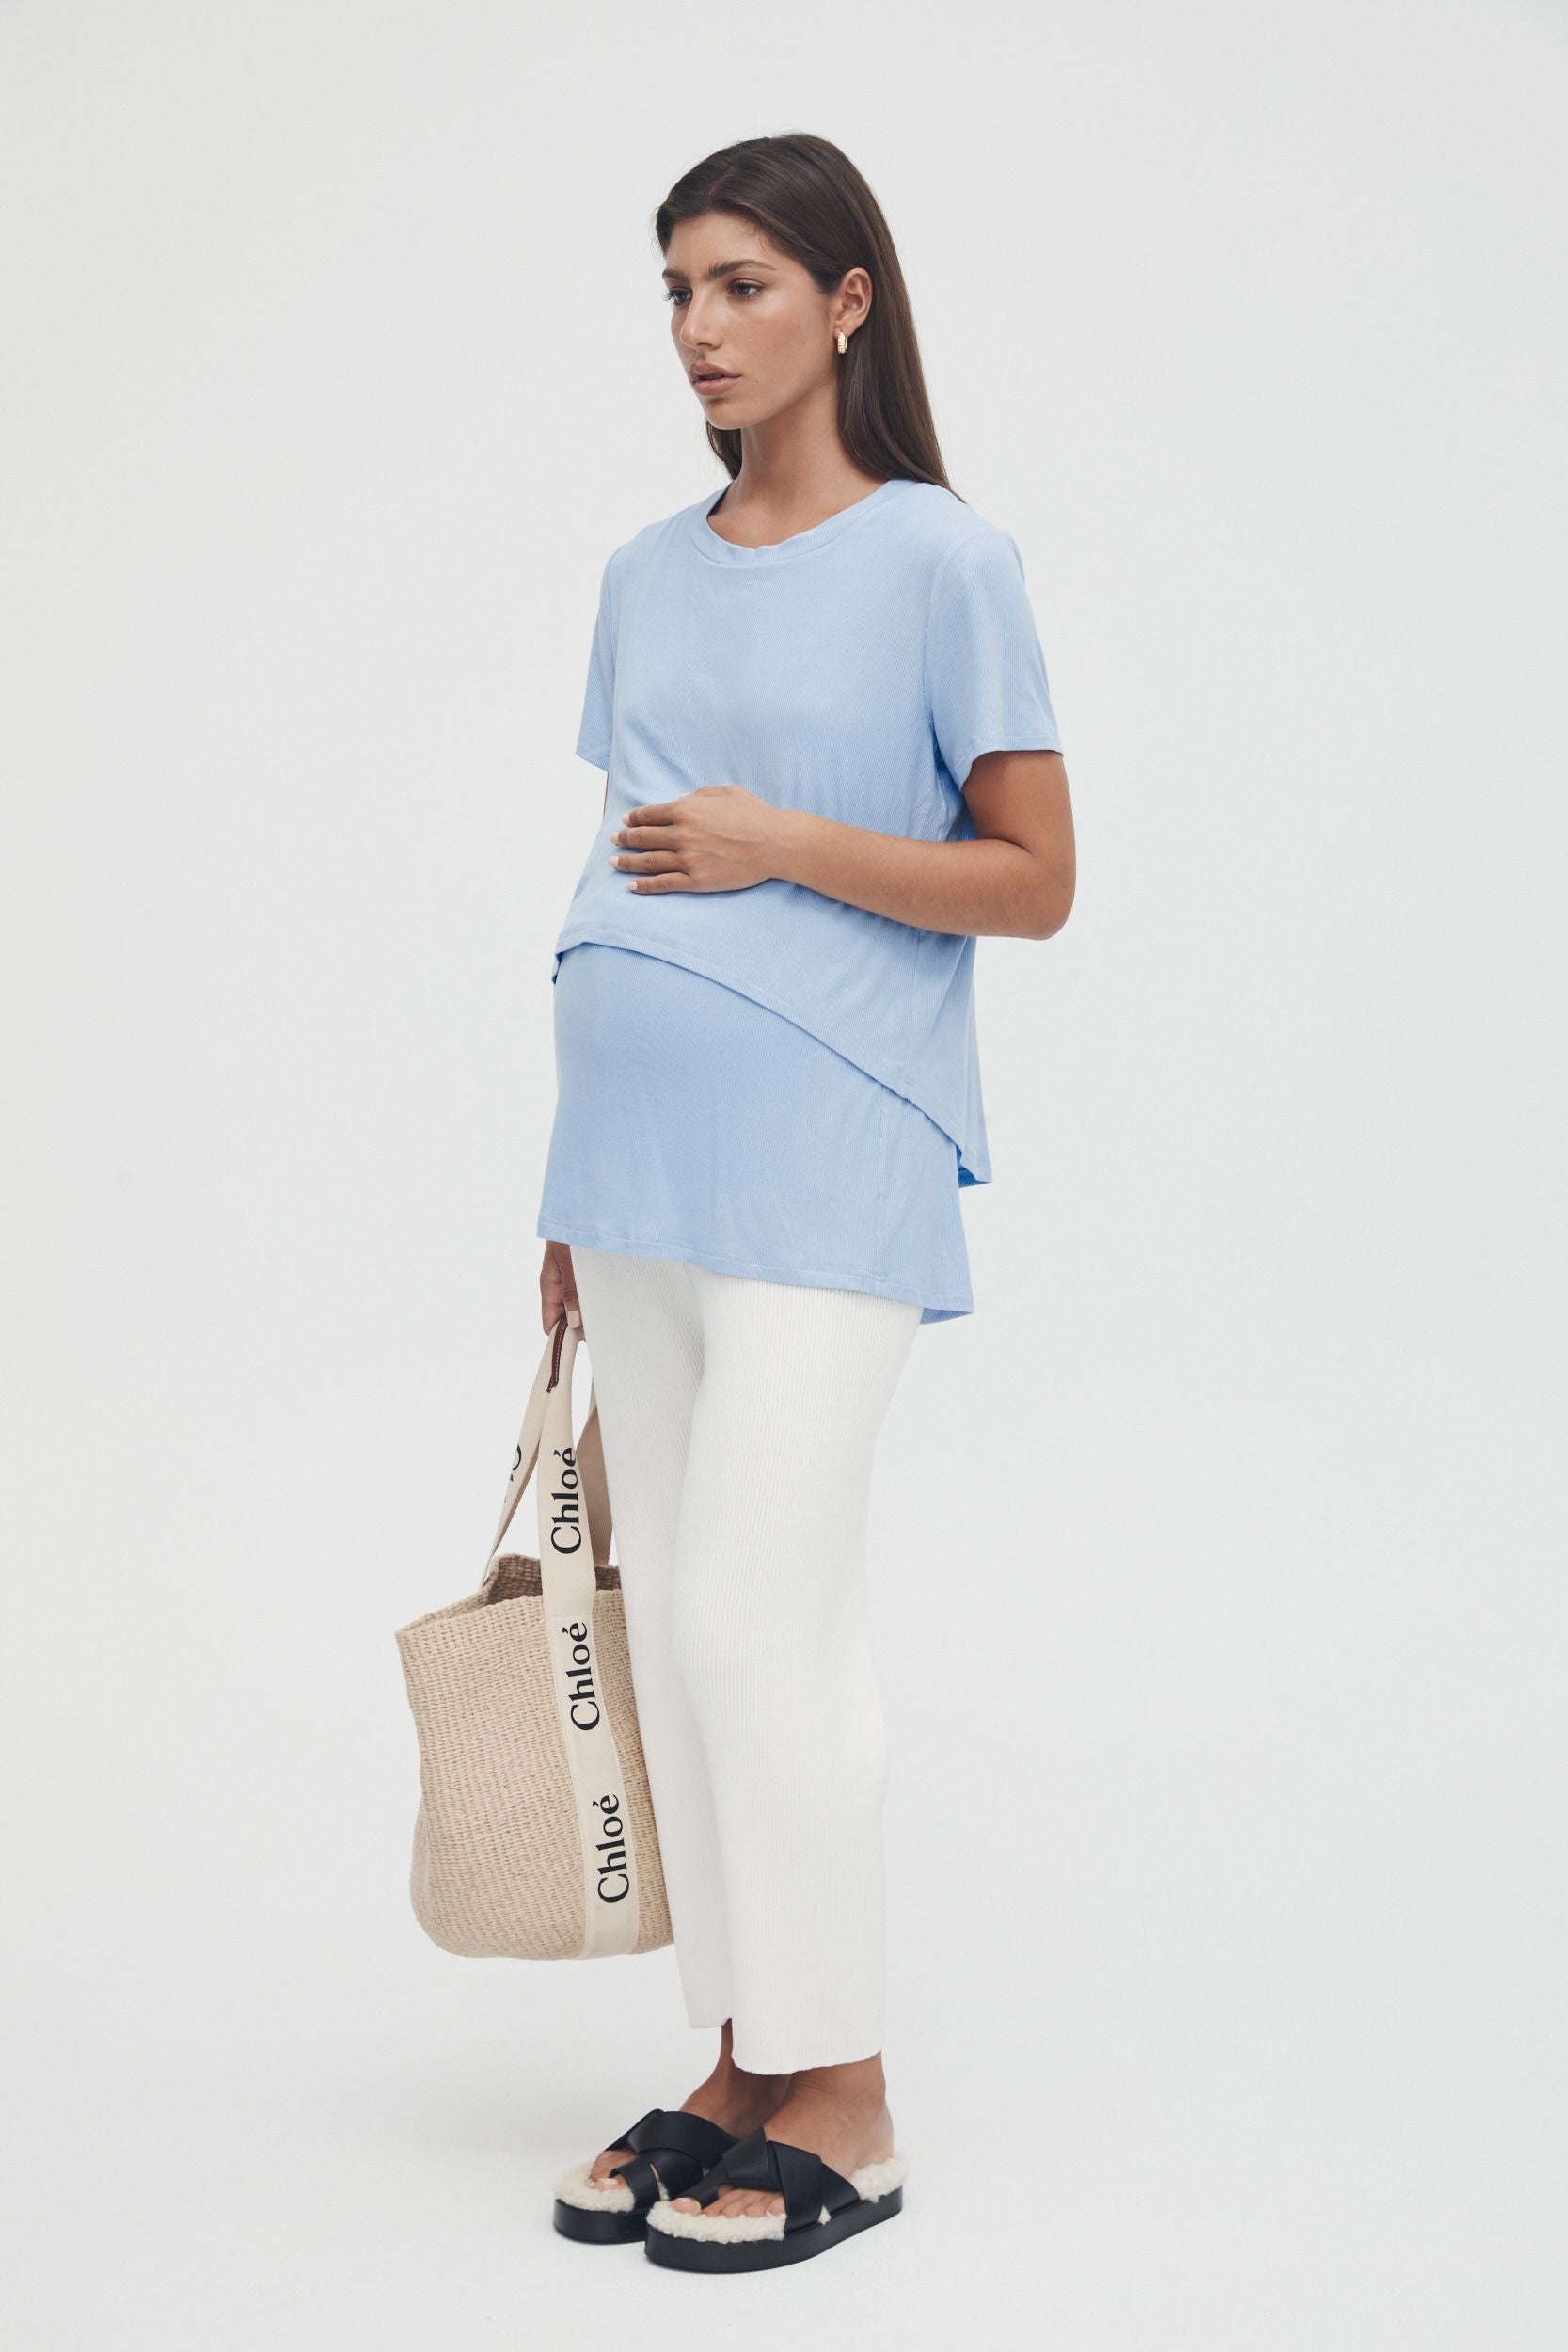 Stretchy Maternity Tee (Pale Blue) 1